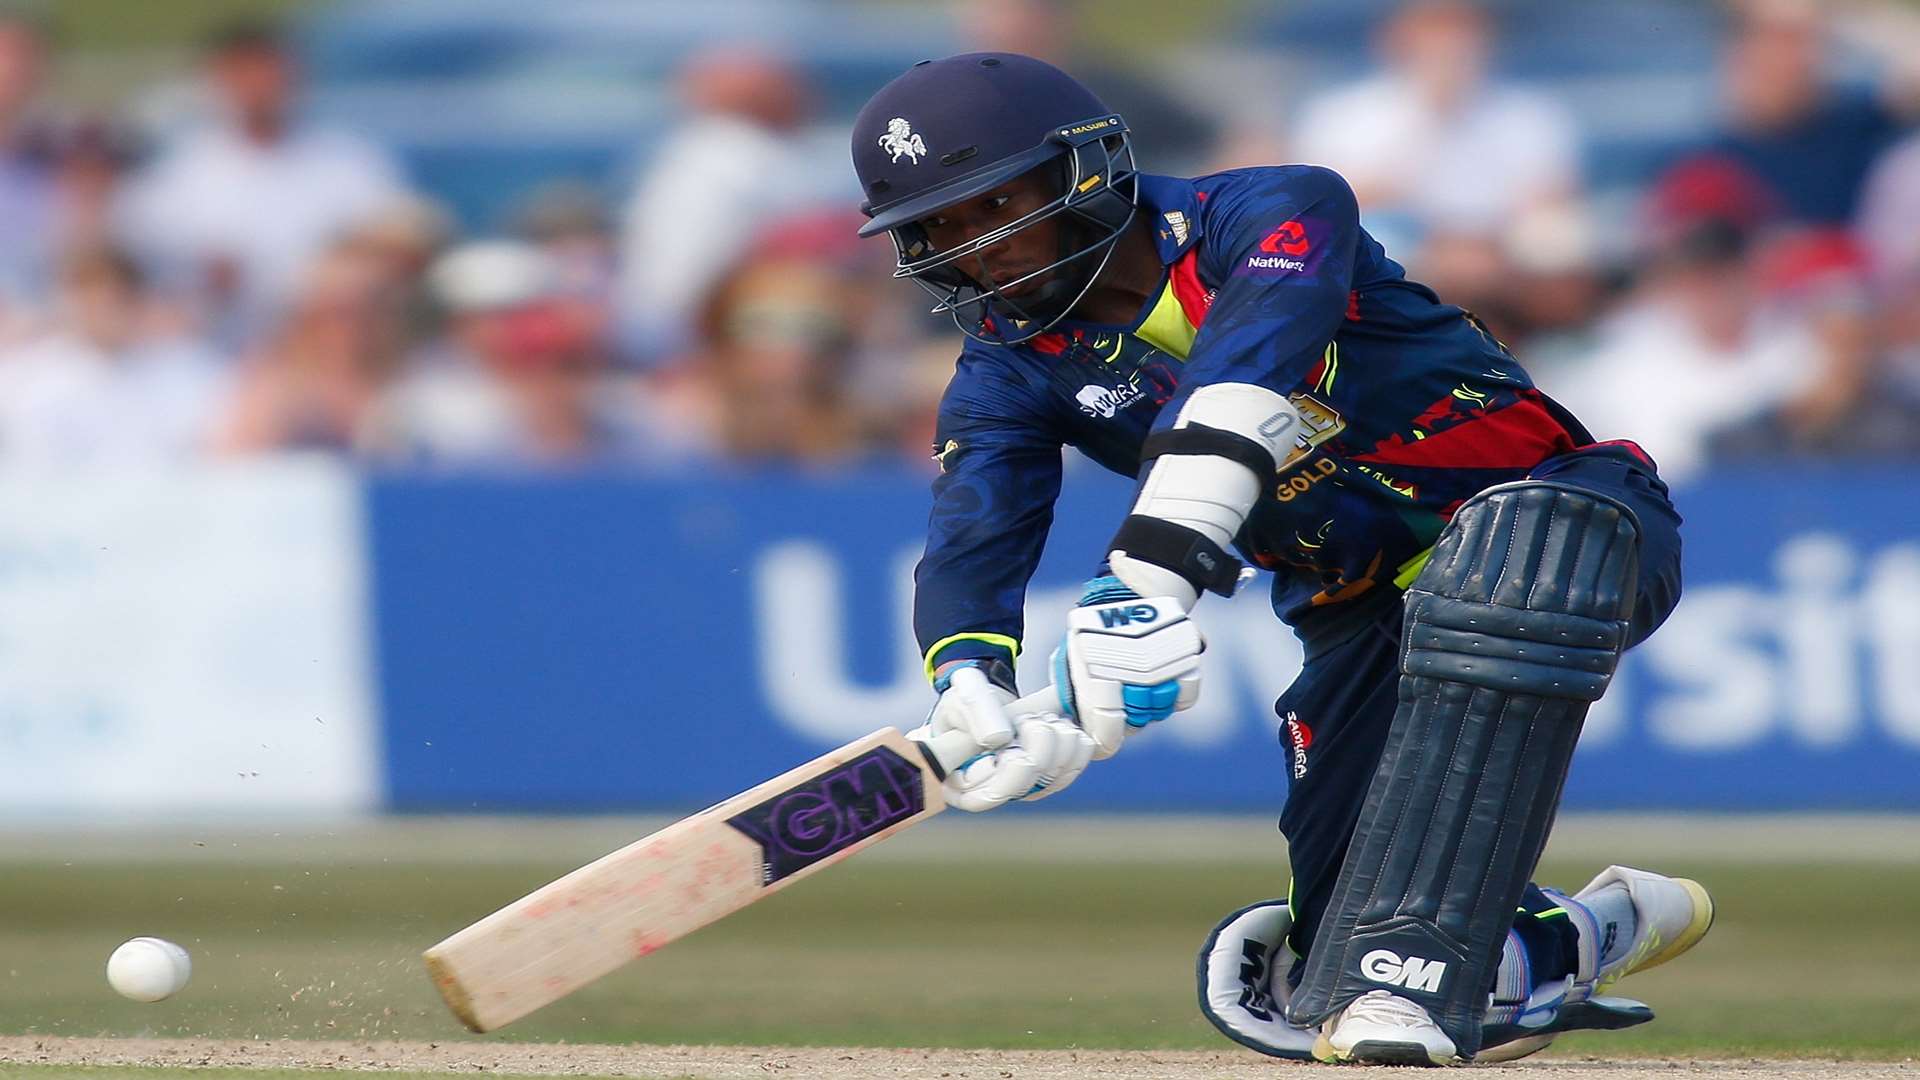 Daniel Bell-Drummond on his way to 90 not out for Spitfires. Picture: Andy Jones